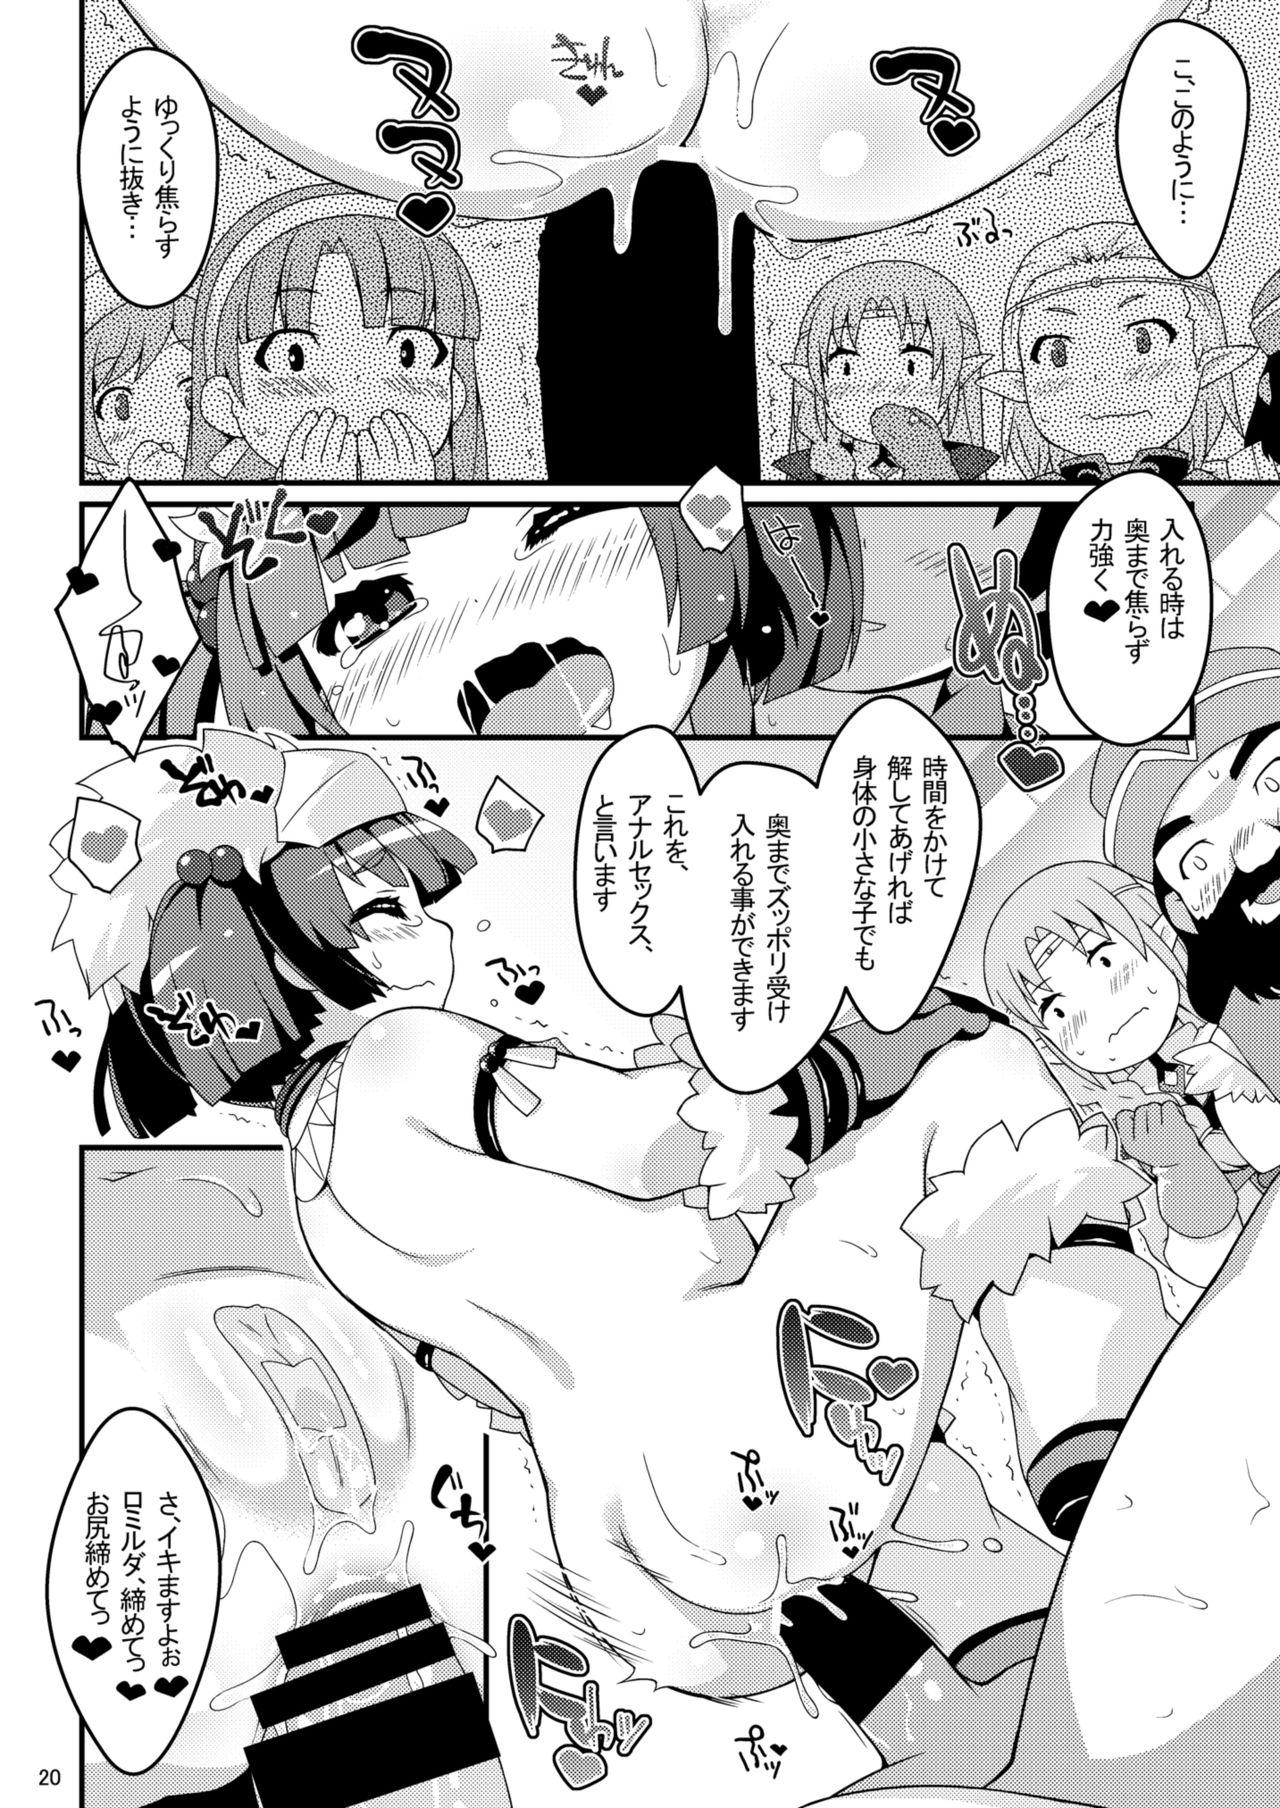 Asslicking Petralka and anal company - Outbreak company Busty - Page 19